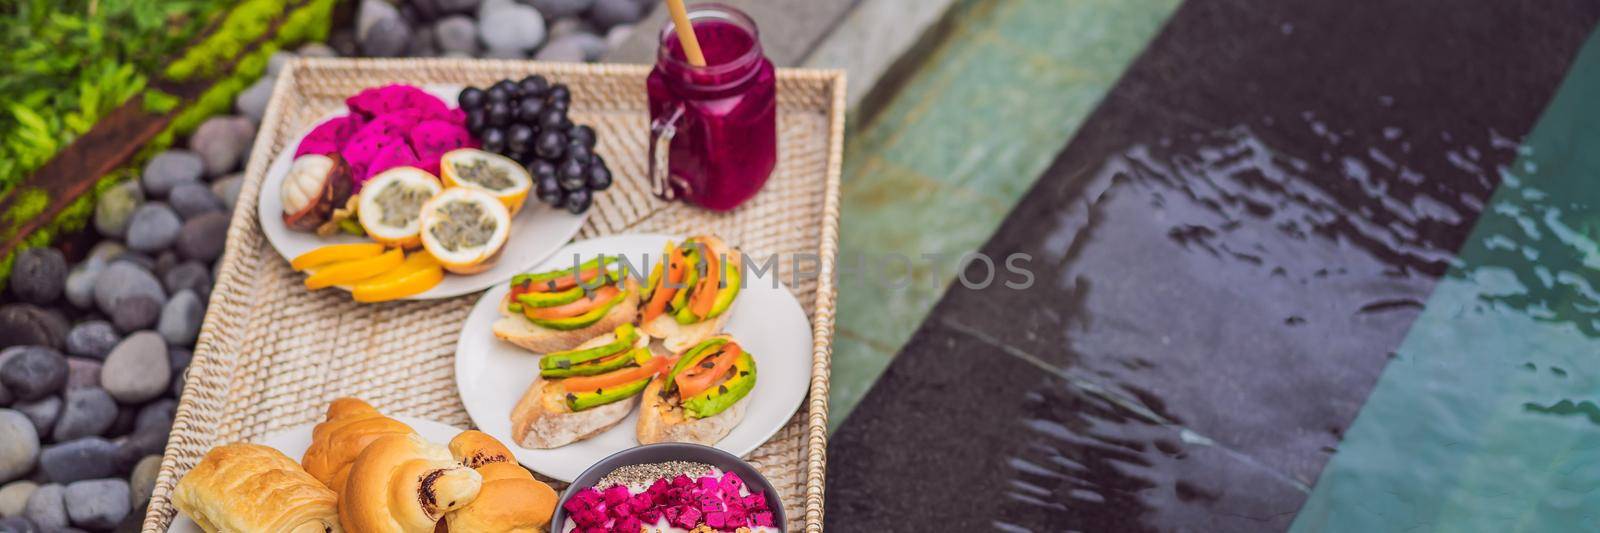 Breakfast on a tray with fruit, buns, avocado sandwiches, smoothie bowl by the pool. Summer healthy diet, vegan breakfast. Tasty vacation concept. BANNER, LONG FORMAT